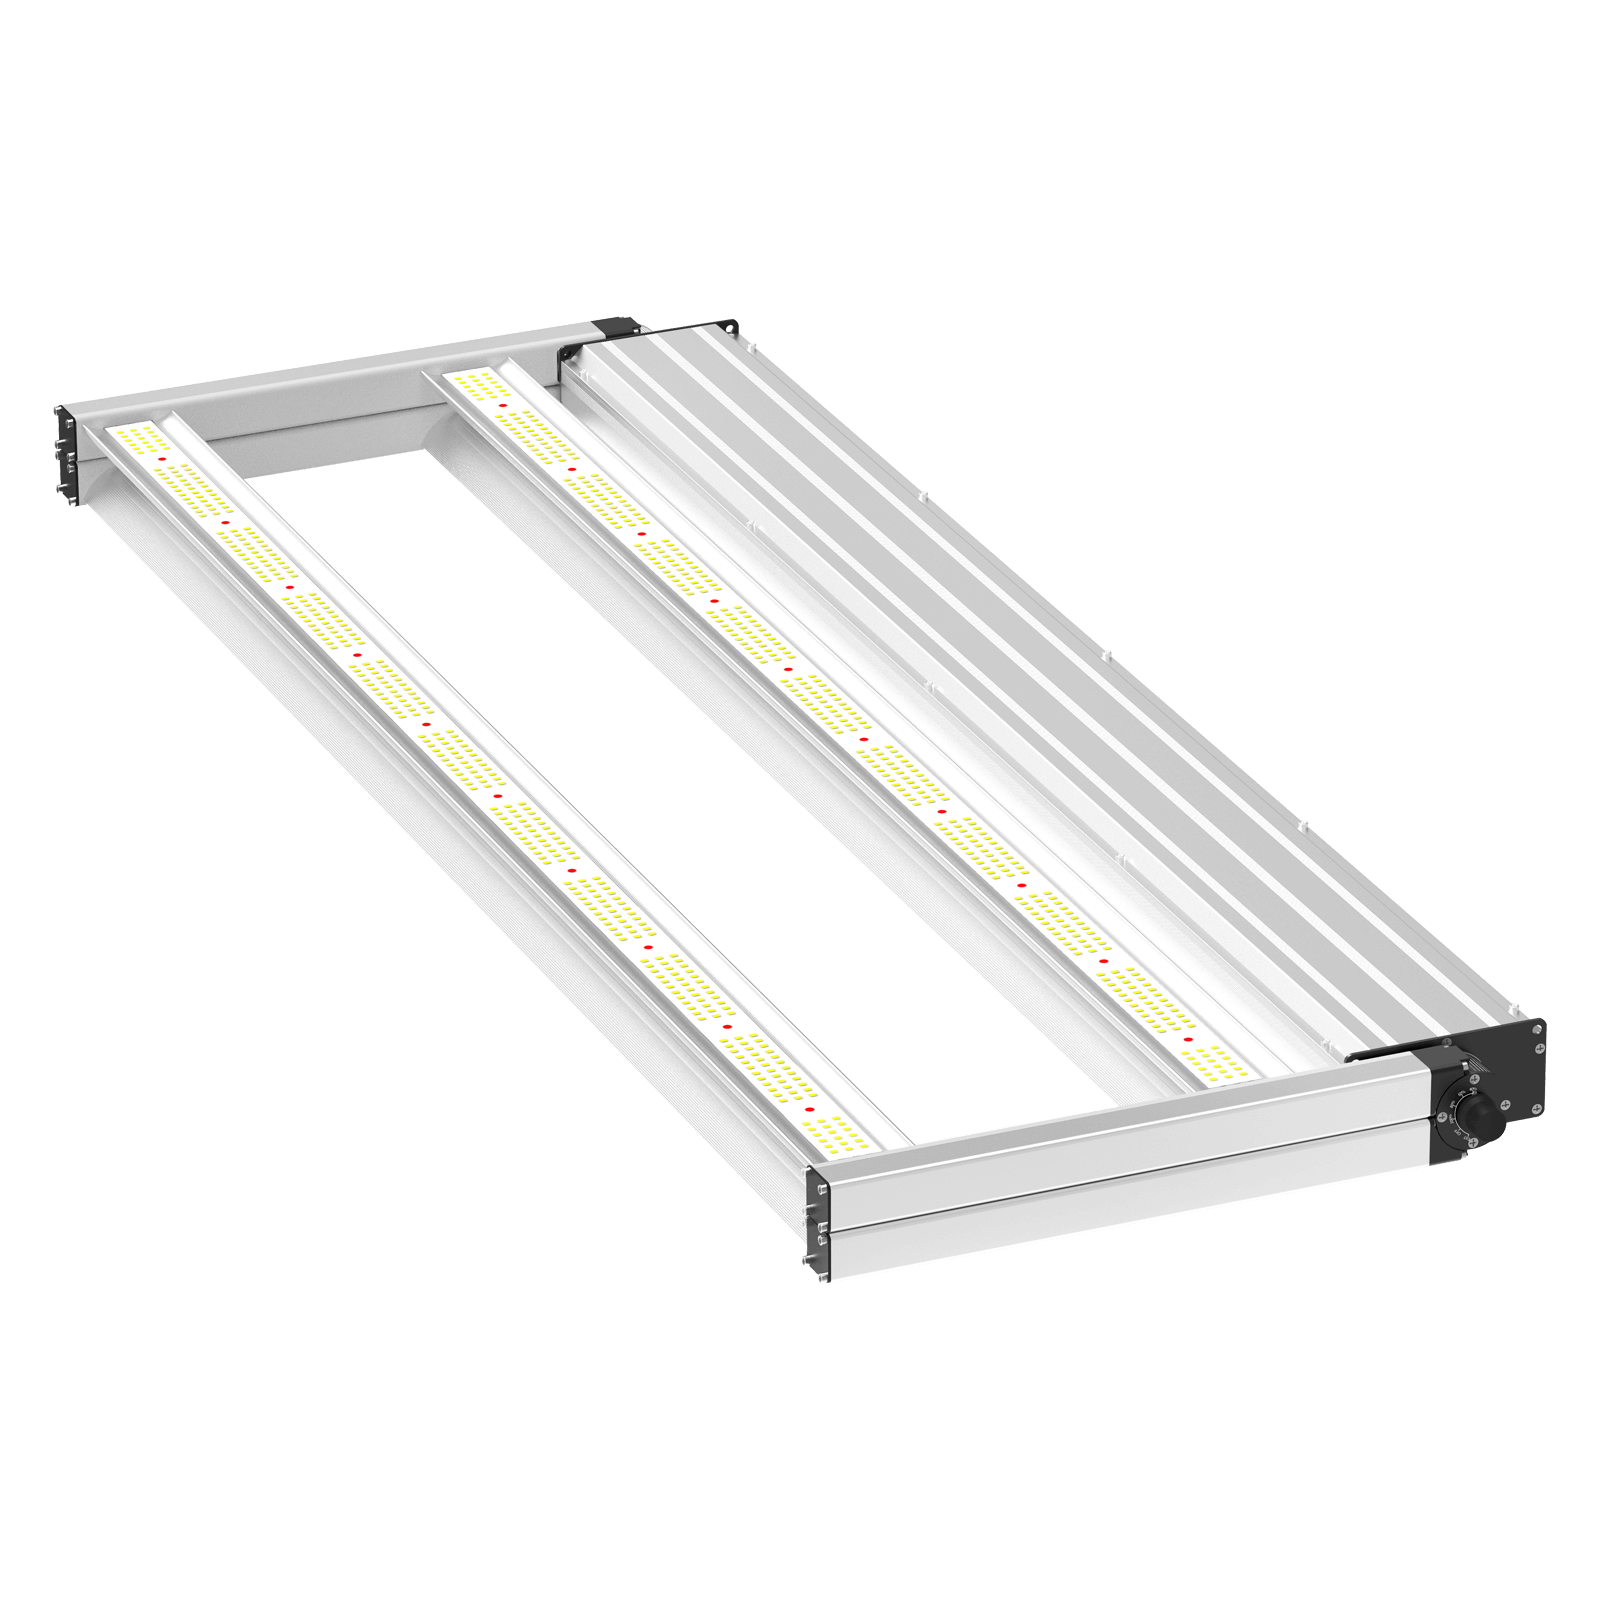 CT-250 Full Spectrum LED Grow Light - 250W, 2.7 μmol/J, Dimmable, 984 pcs Diodes | Cultiuana